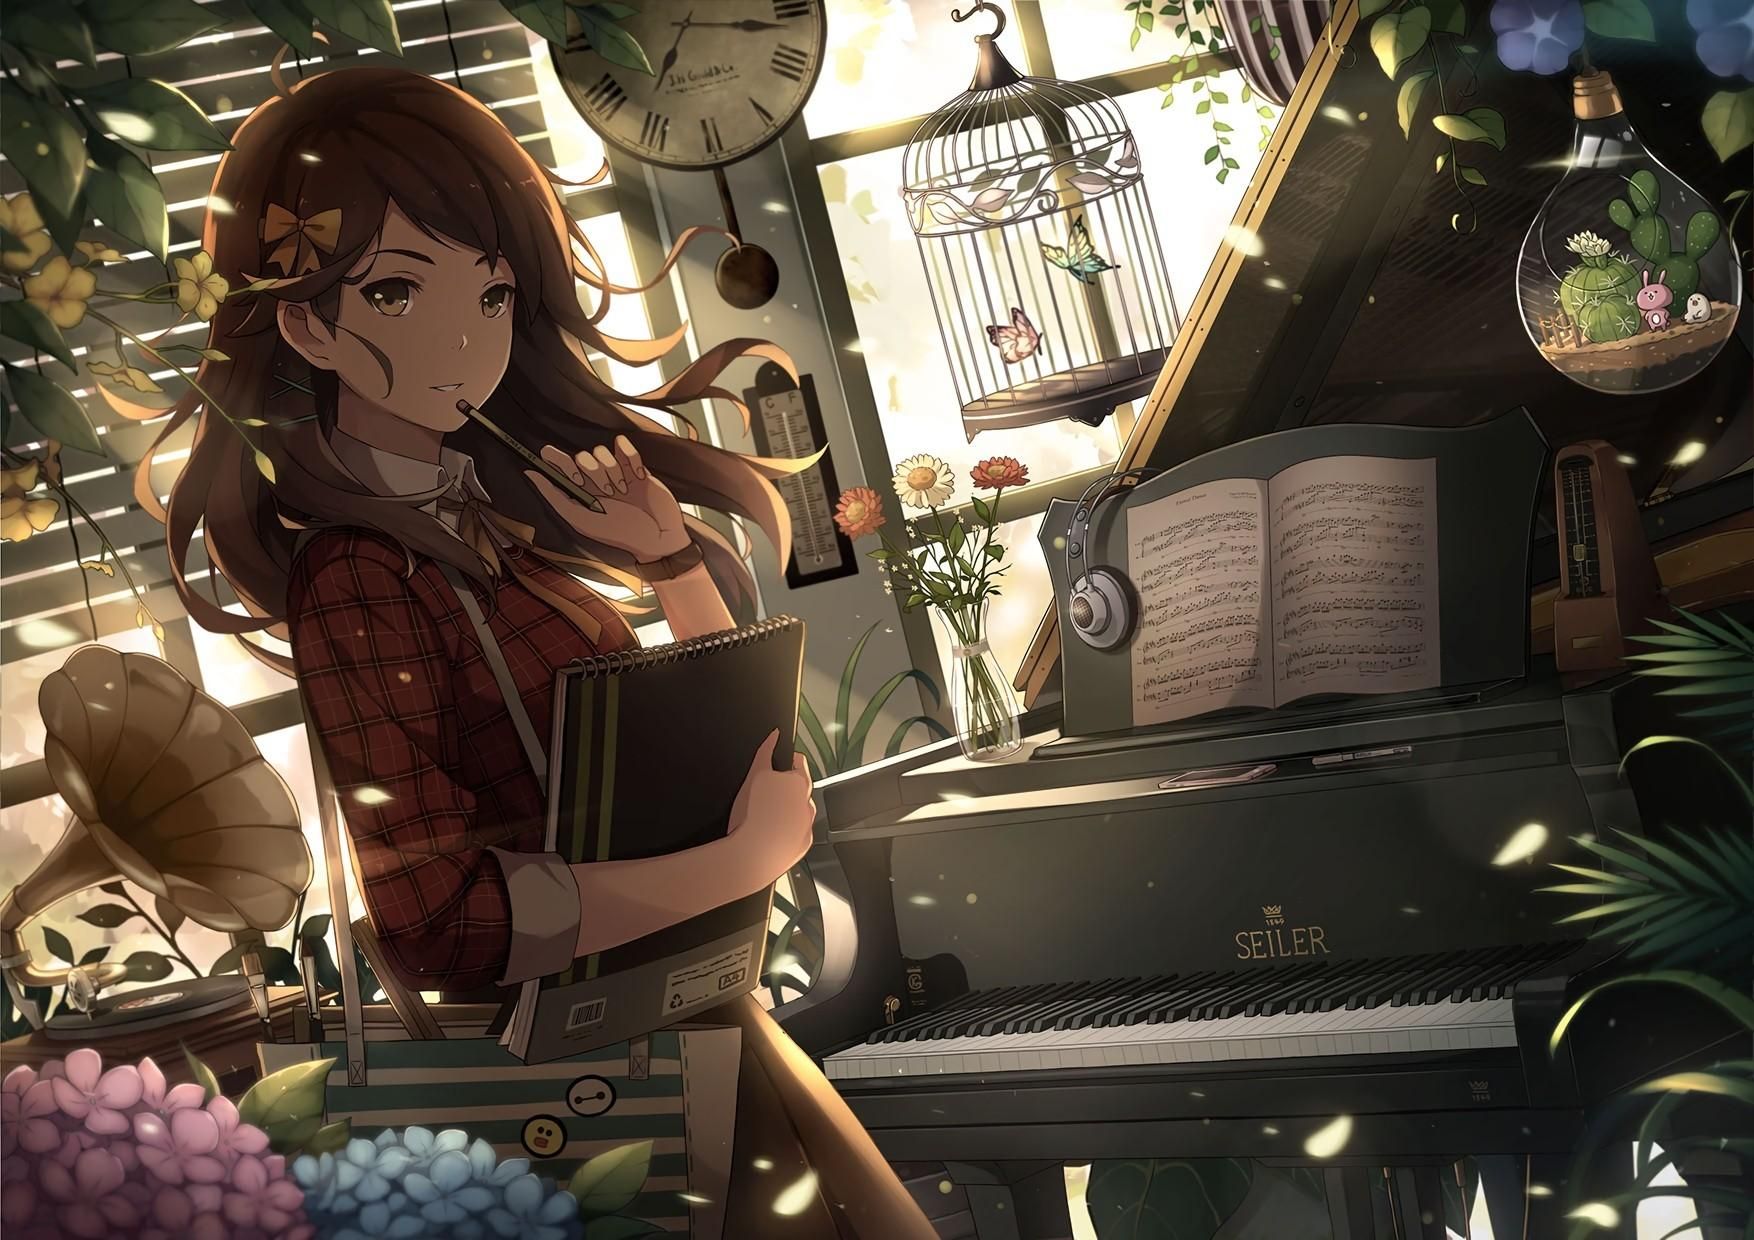 An anime girl with a piano and manuscript paper, in a room full of plants and stuff